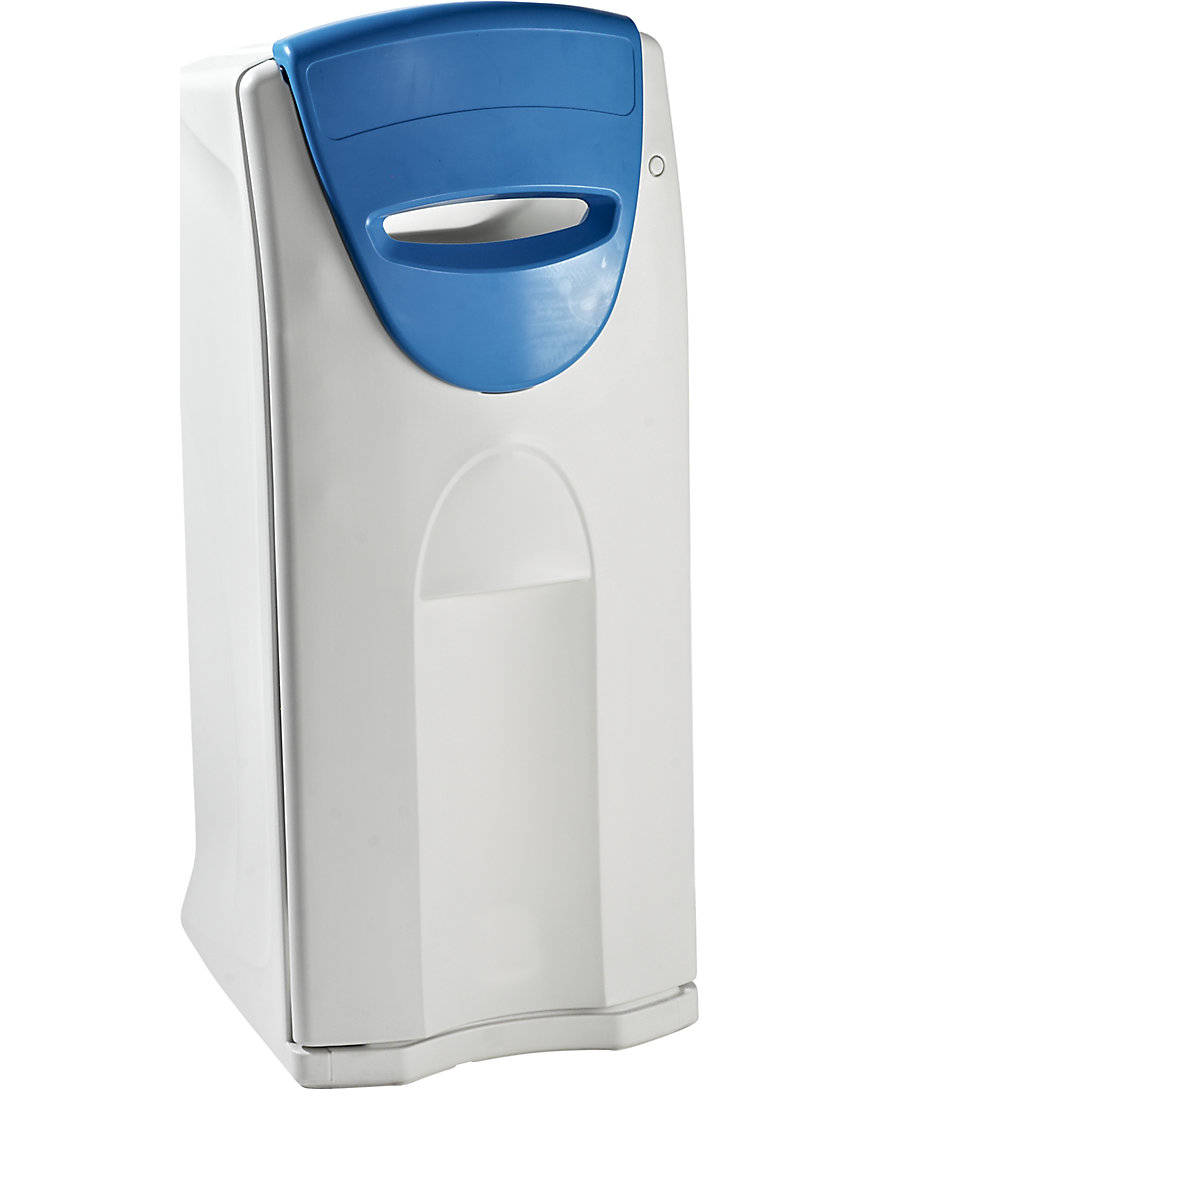 MAXI recyclable waste collector